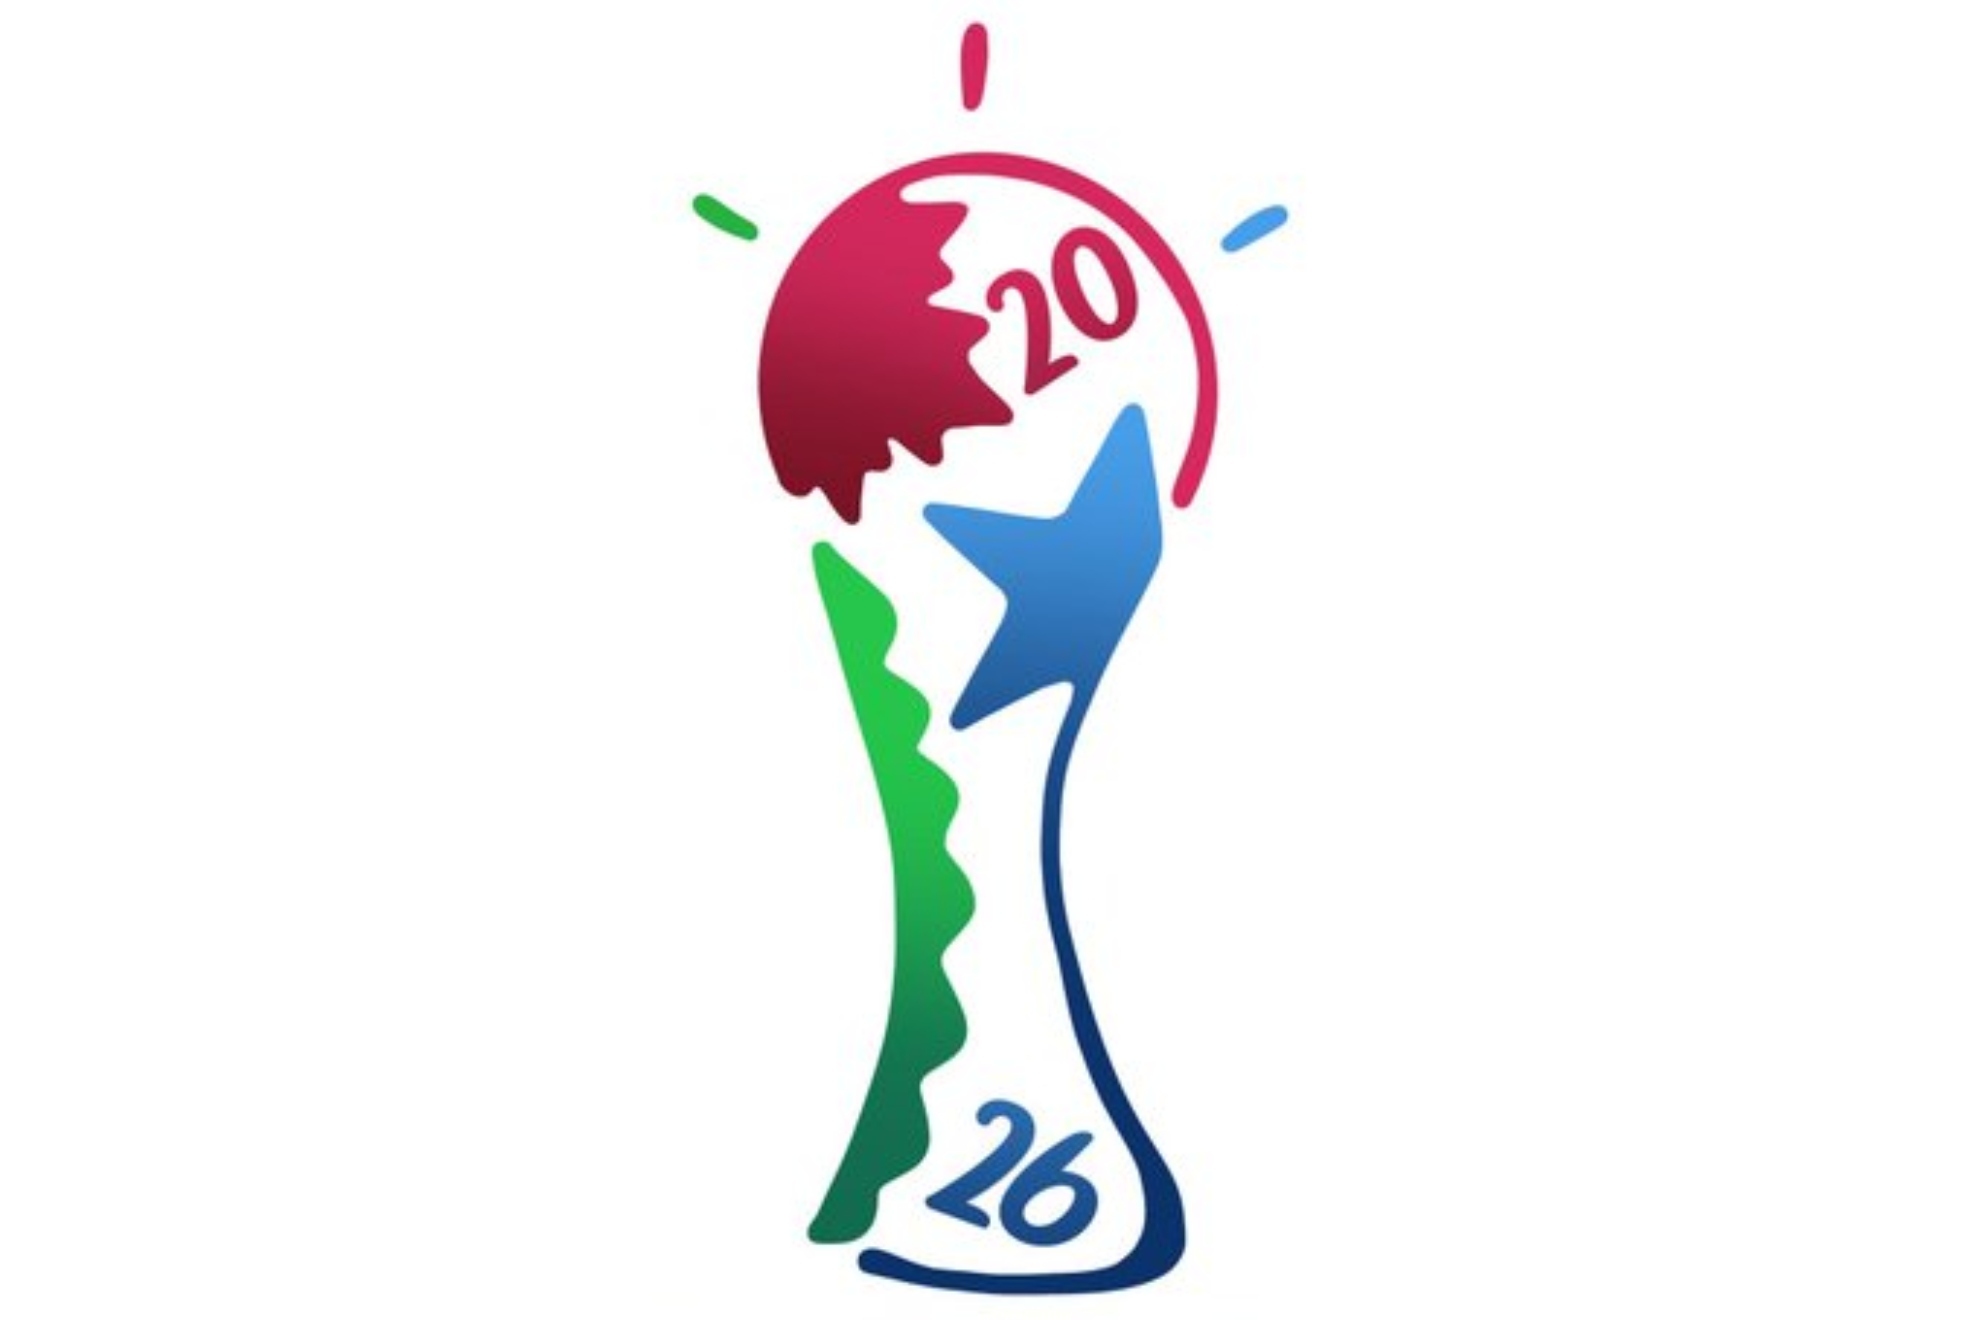 world cup 2026